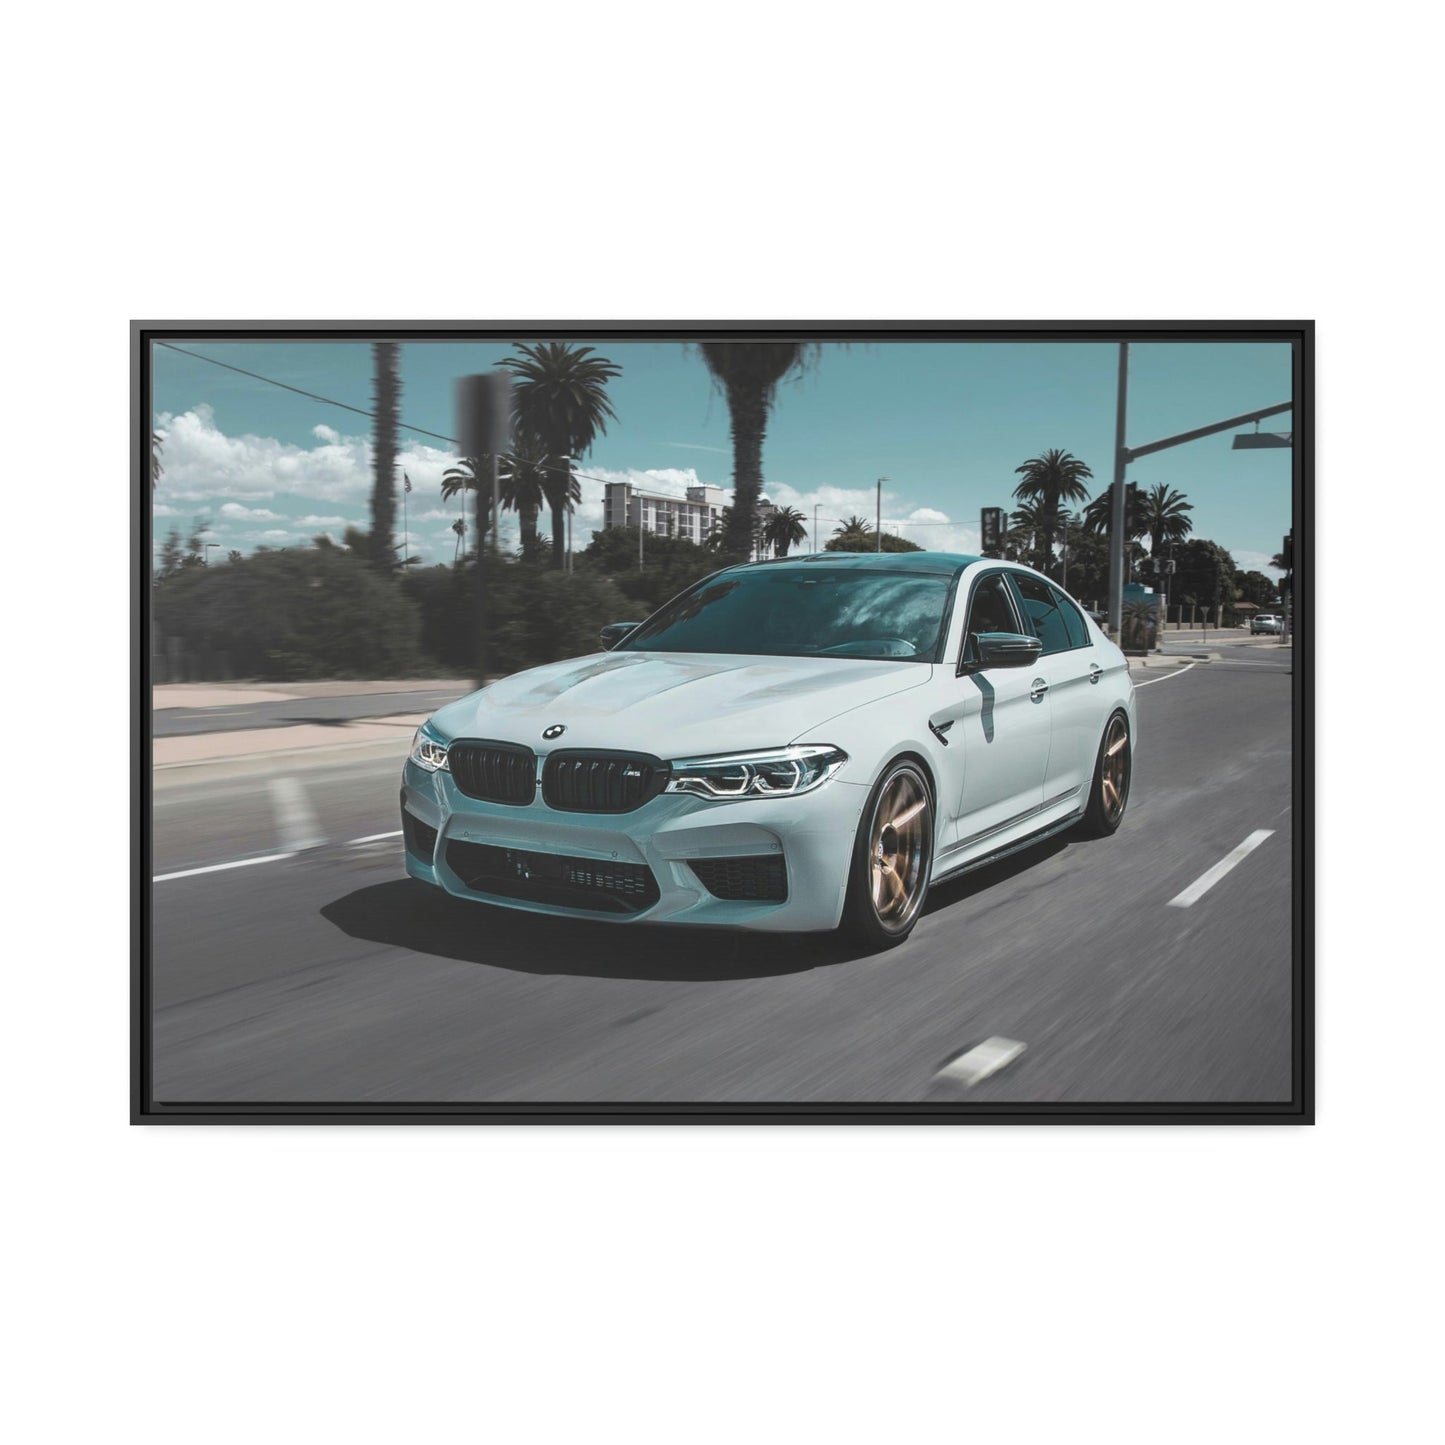 BMW on Canvas: Captivating Canvas & Poster Print for Car Enthusiasts